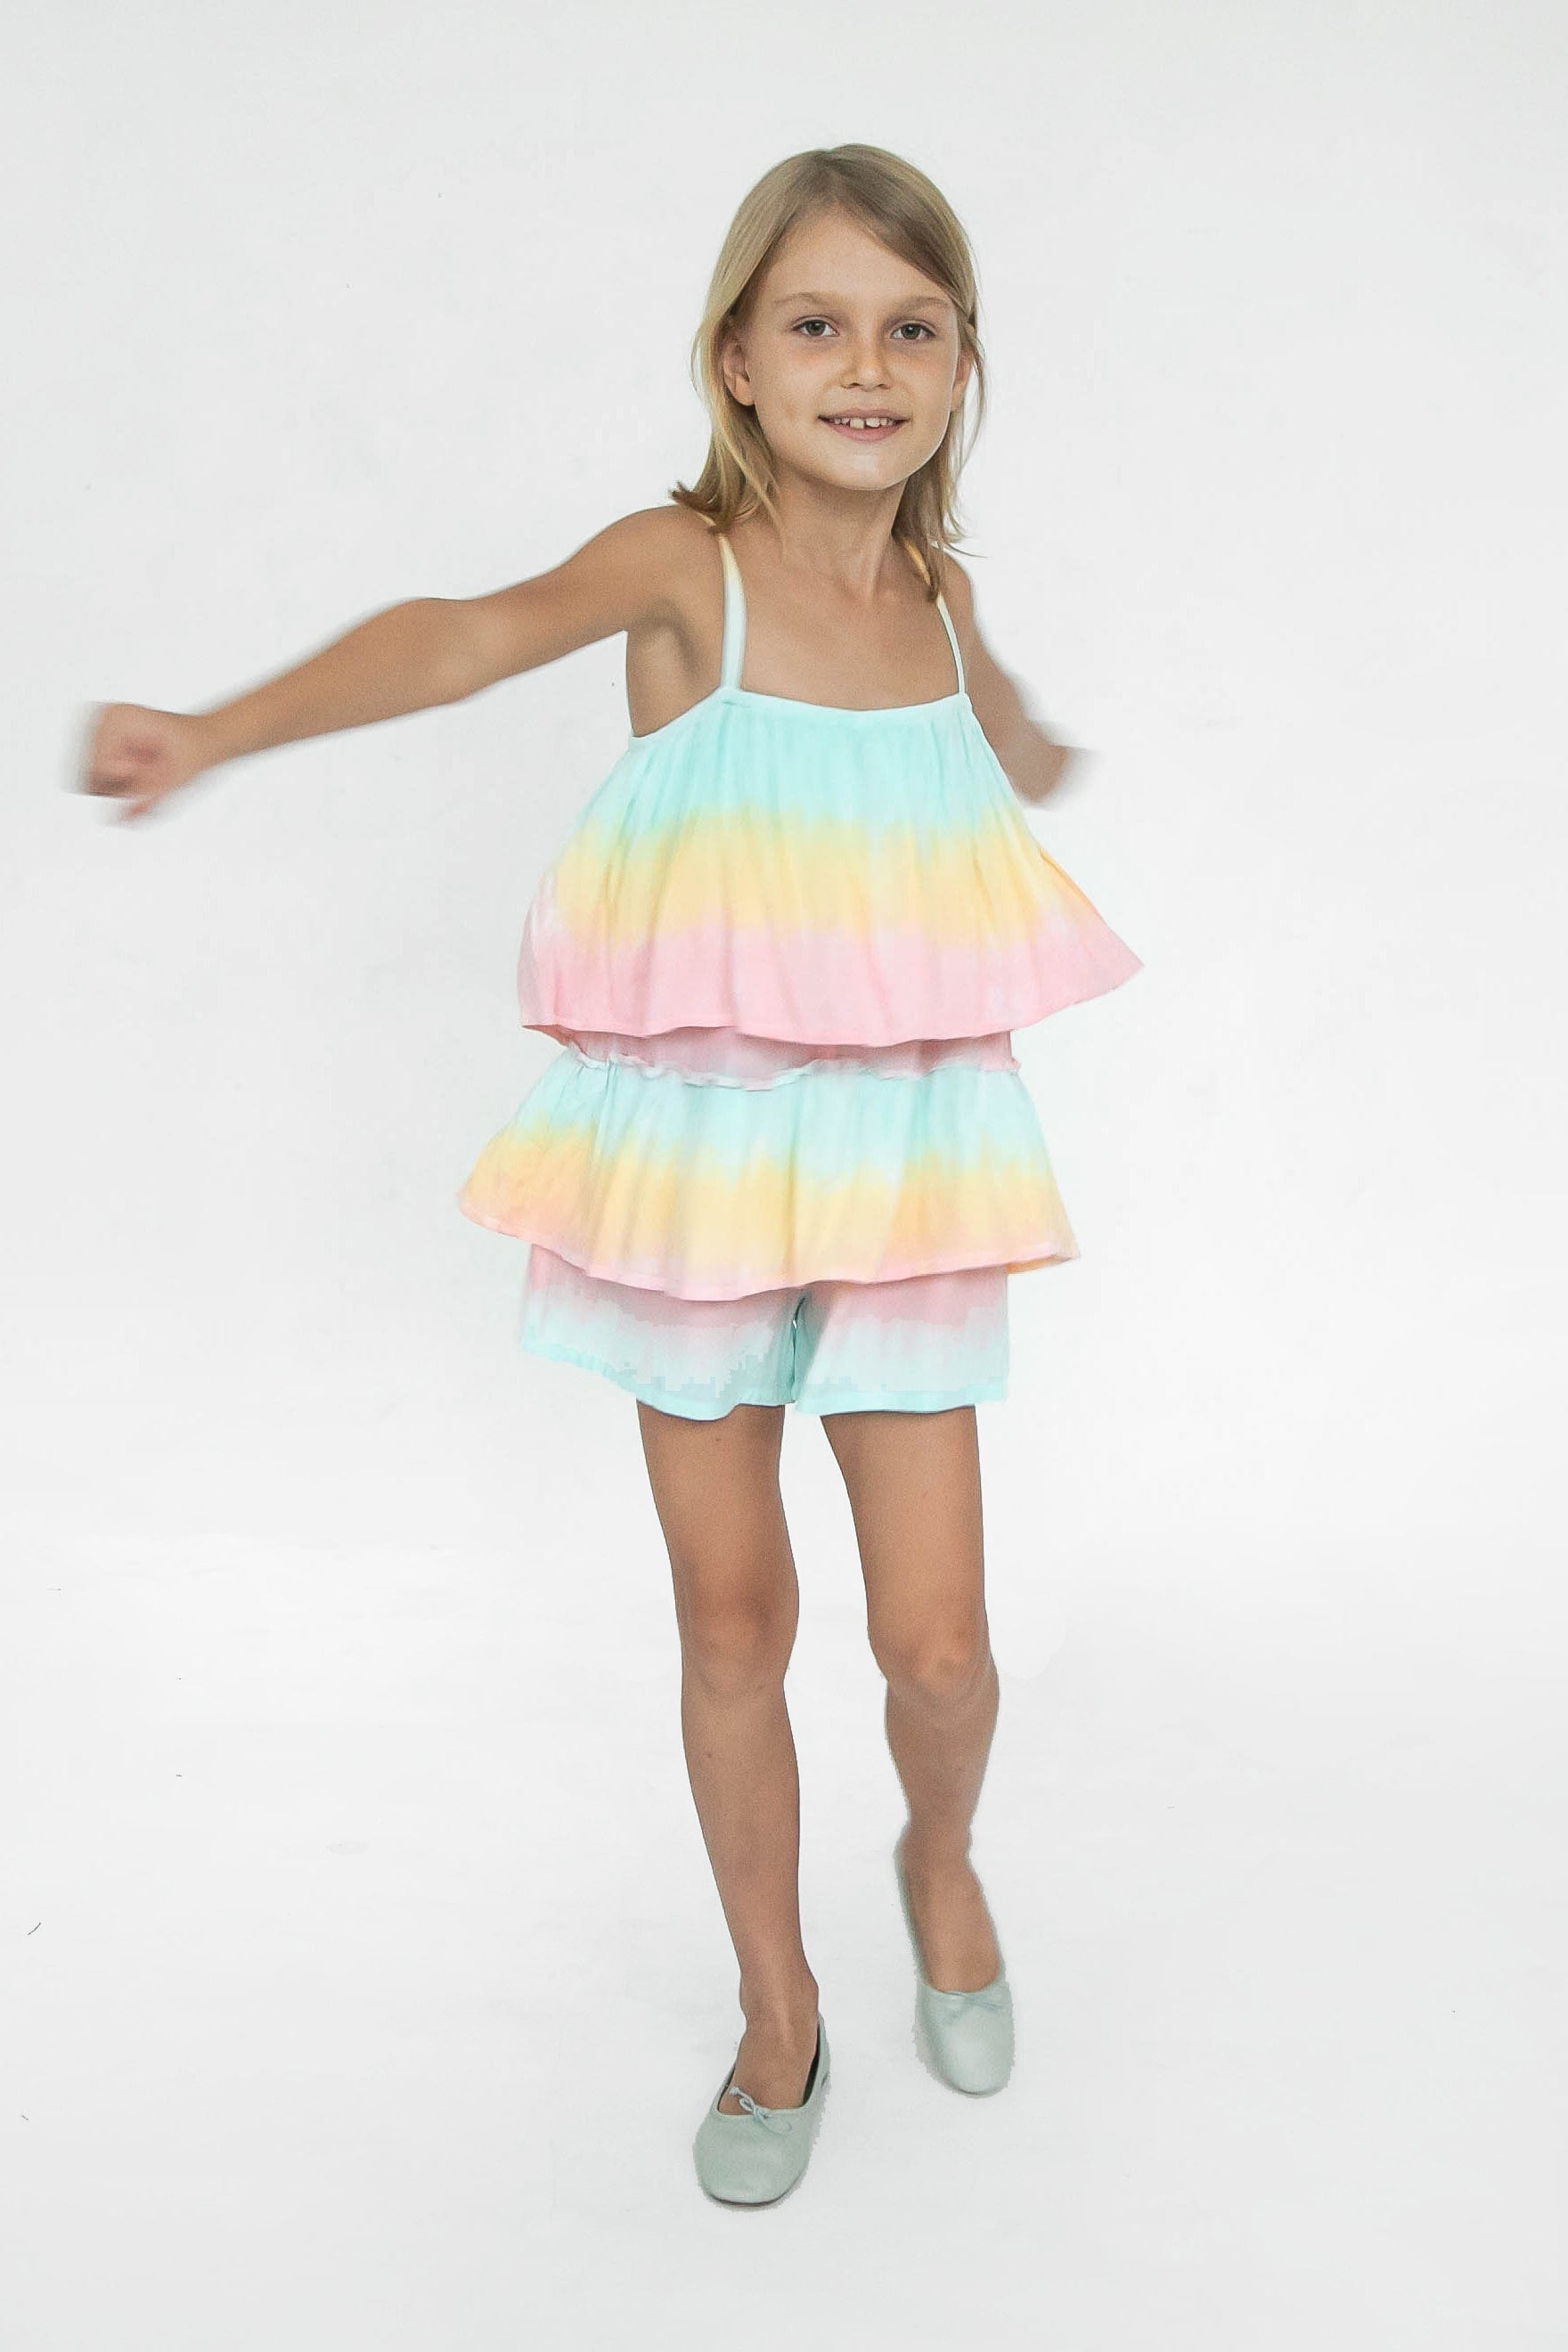 Joyous and Free Joyous and Free Violet Romper - Little Miss Muffin Children & Home